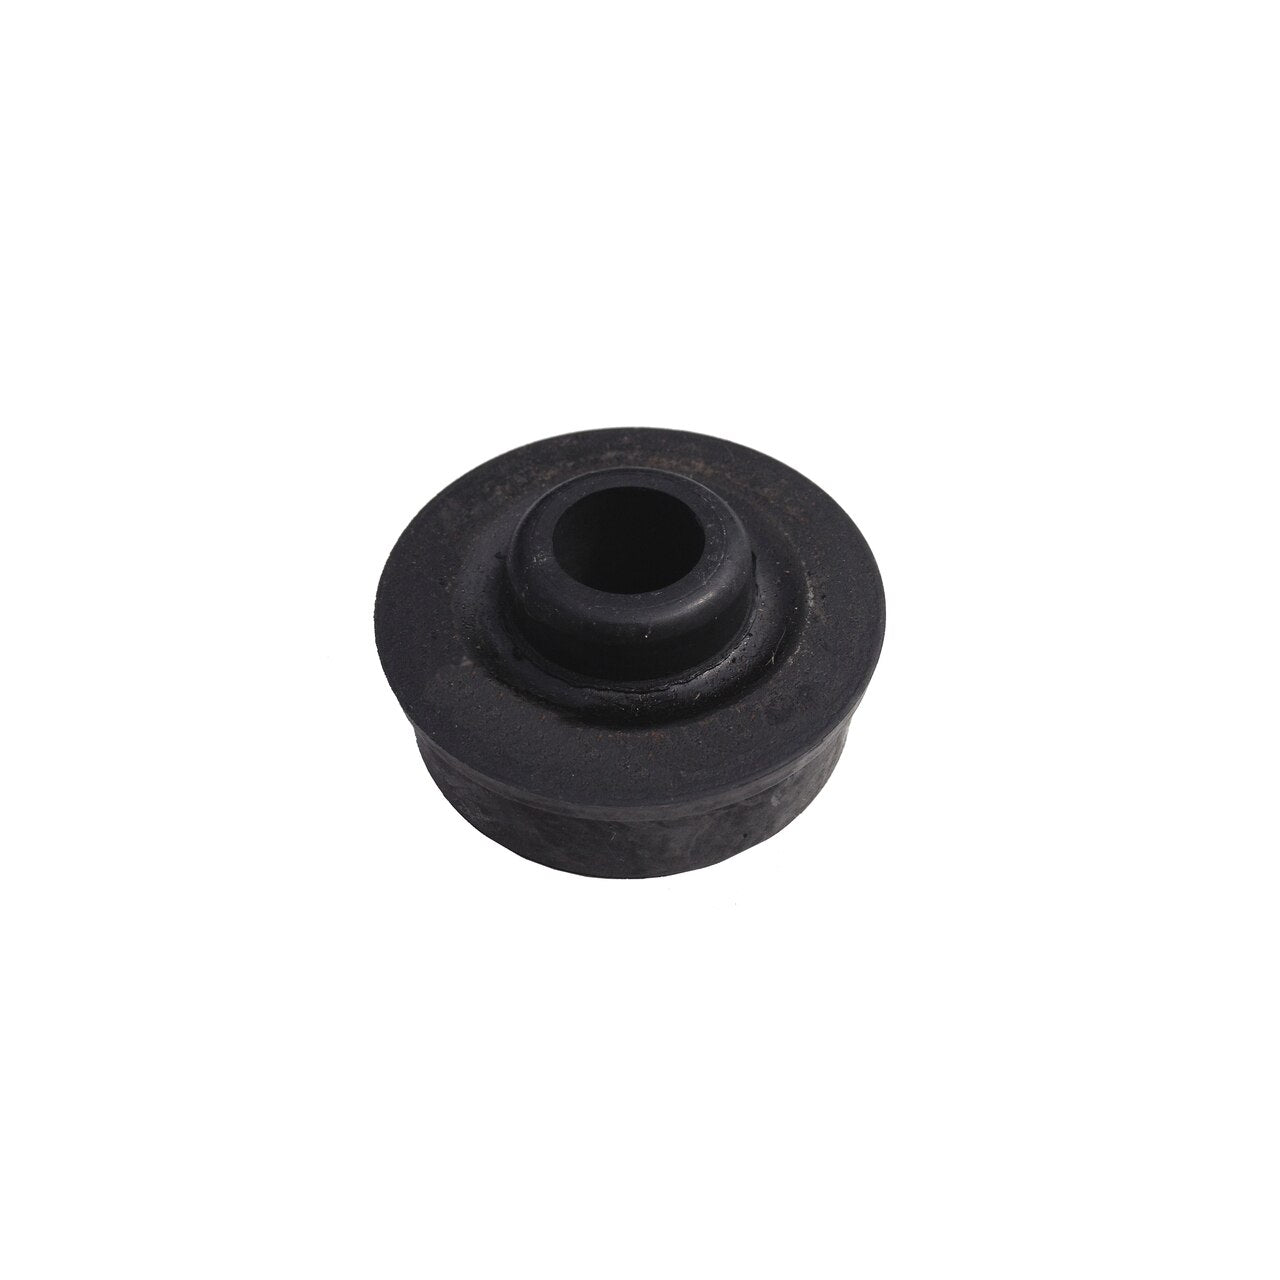 TRANSMISSION MOUNT REAR XM-P - ROUND LOWER TYPE (USE WITH C1DD6068A)